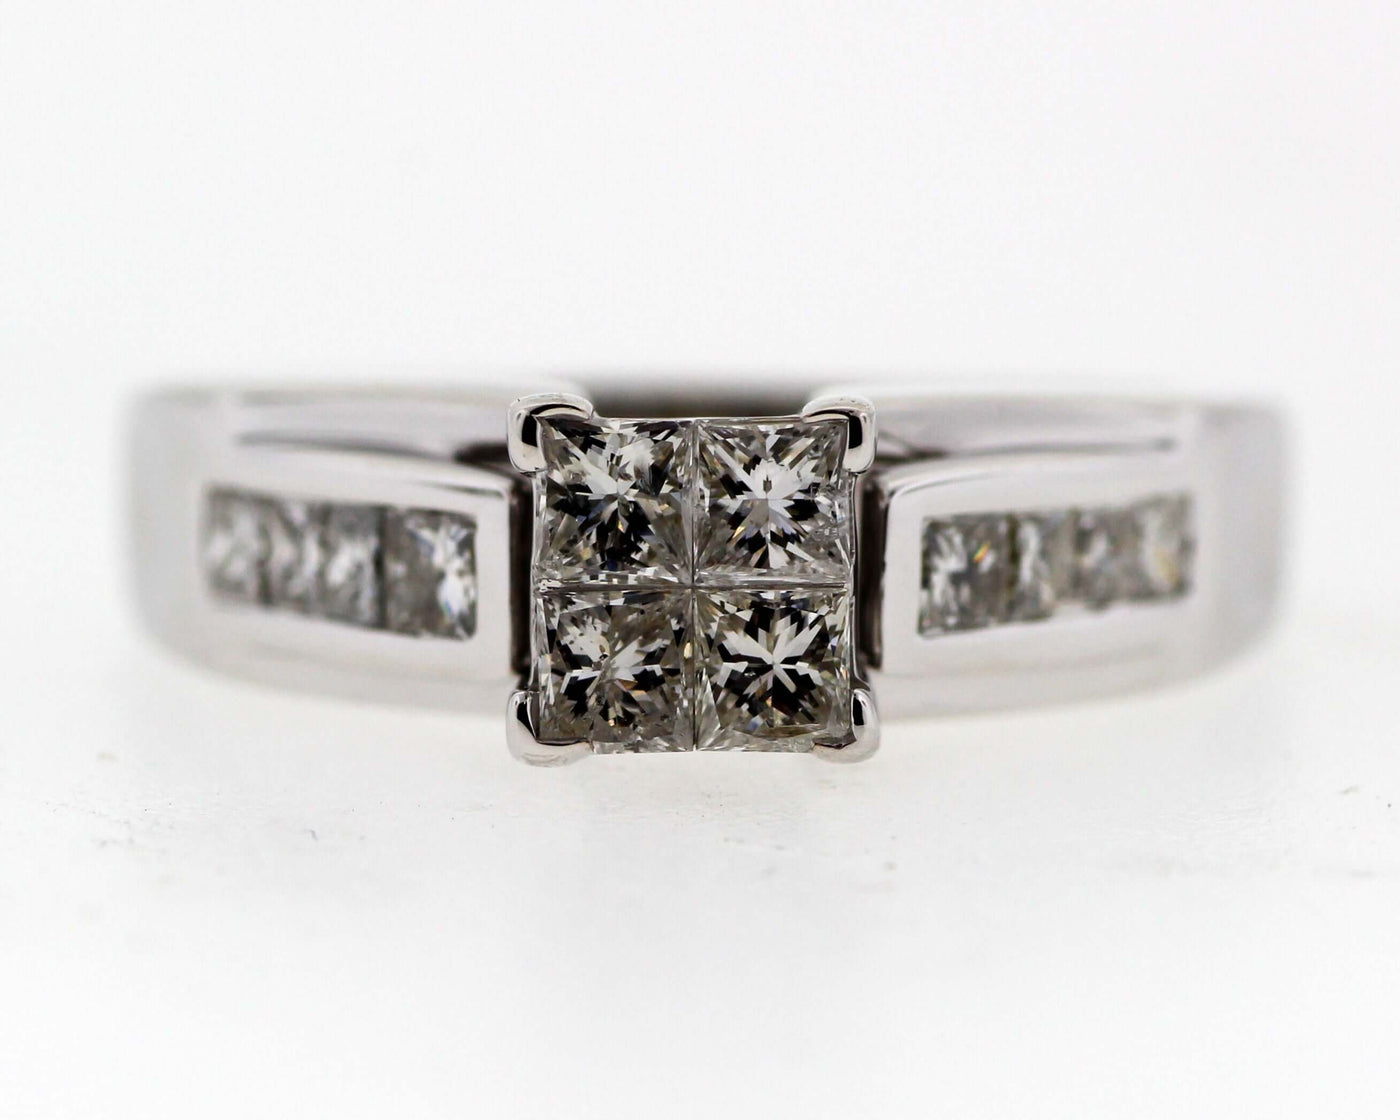 14KW 1.16 CTTW DIAMOND ENGAGEMENT RING .60 CTTW CLUSTER CENTER G-H SI2